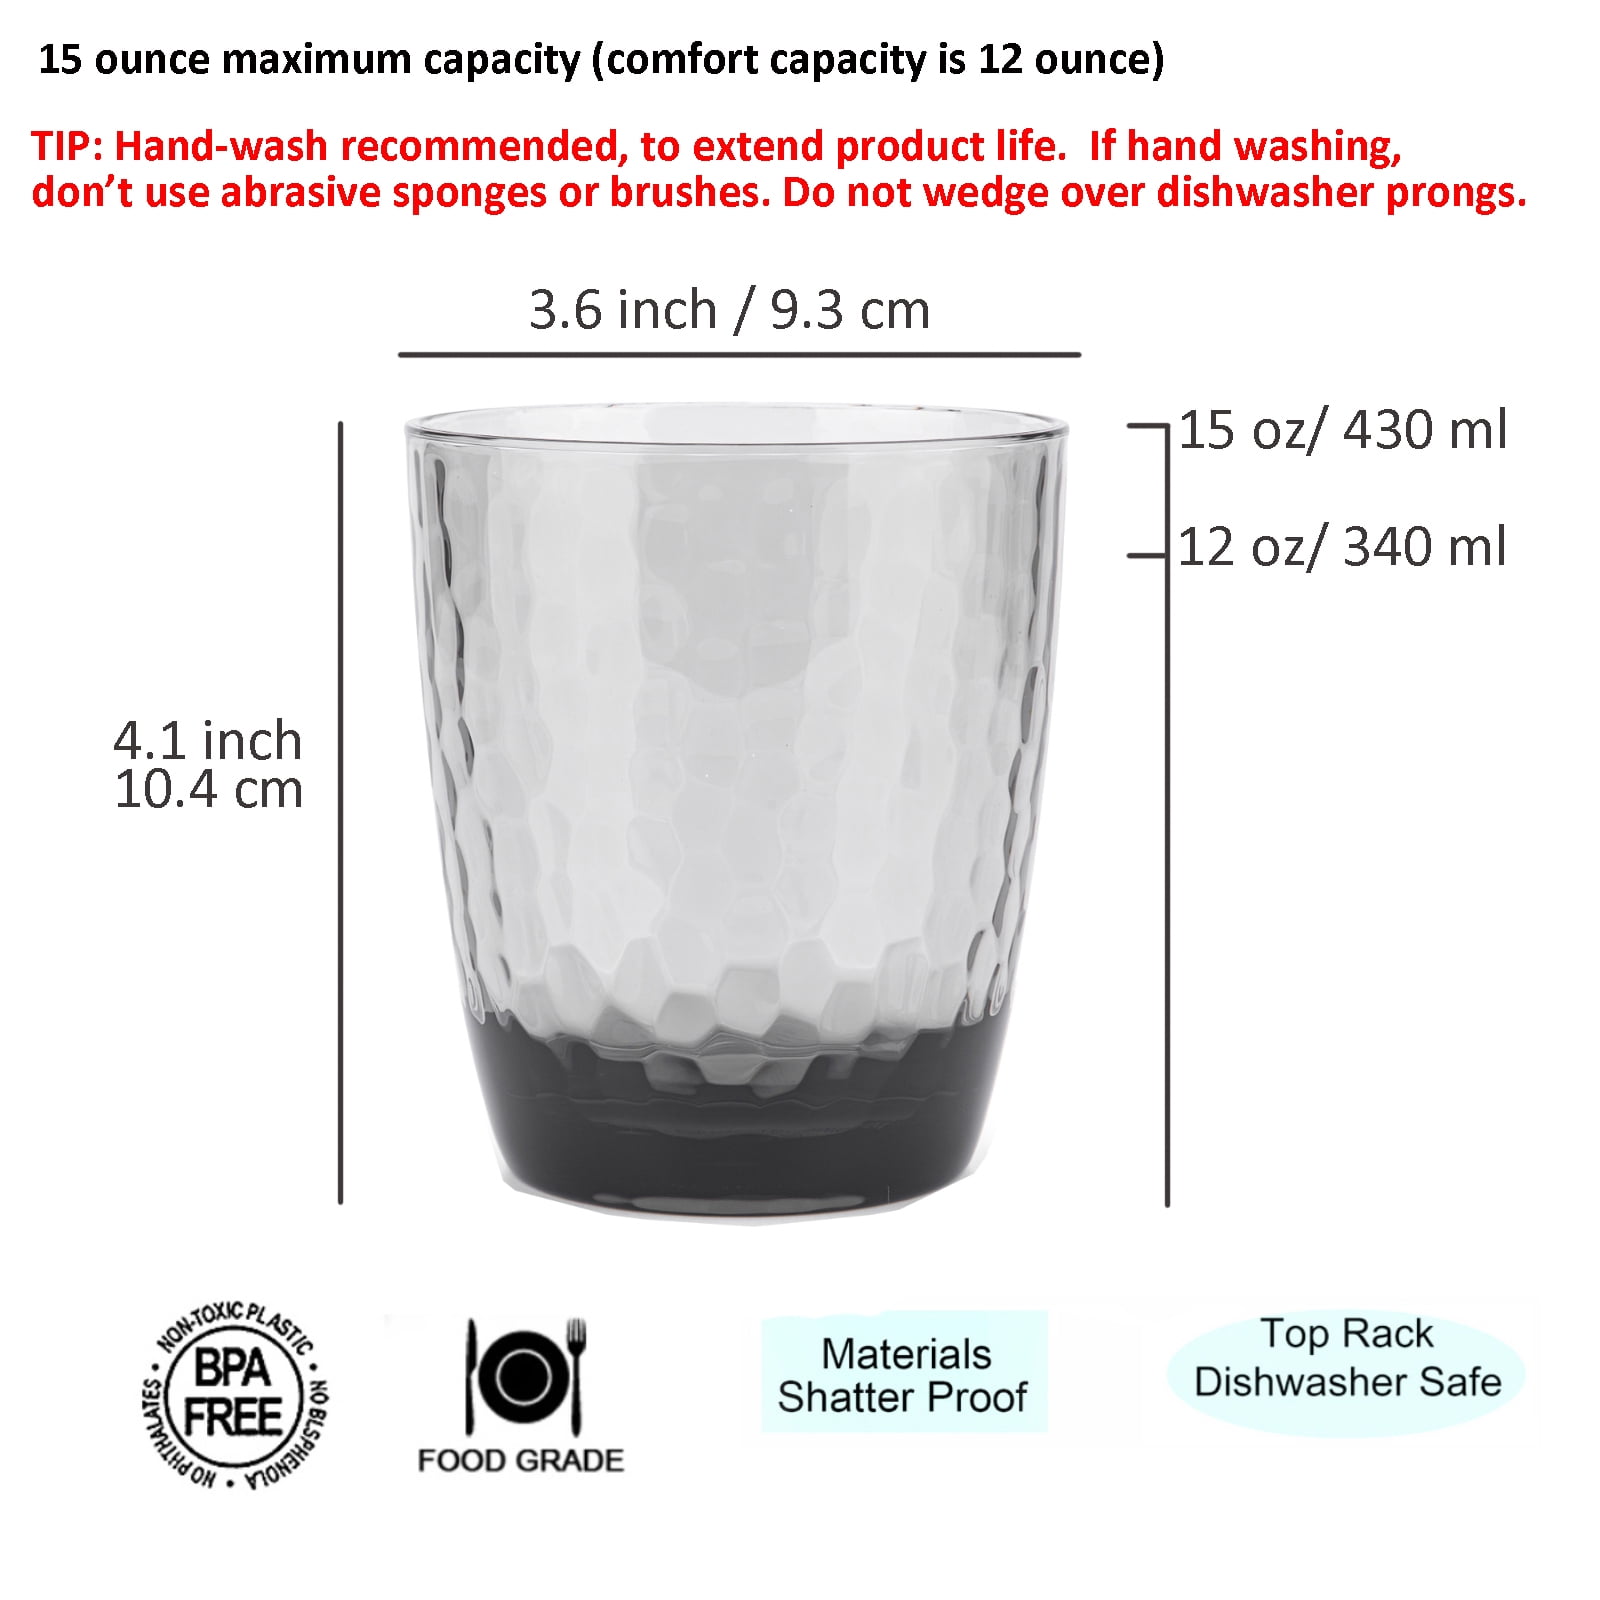 Plastic Drinking Glasses 48 Pcs - 14 oz Whiskey Glass, Highball Glasses -  Disposable Clear Hard Plas…See more Plastic Drinking Glasses 48 Pcs - 14 oz